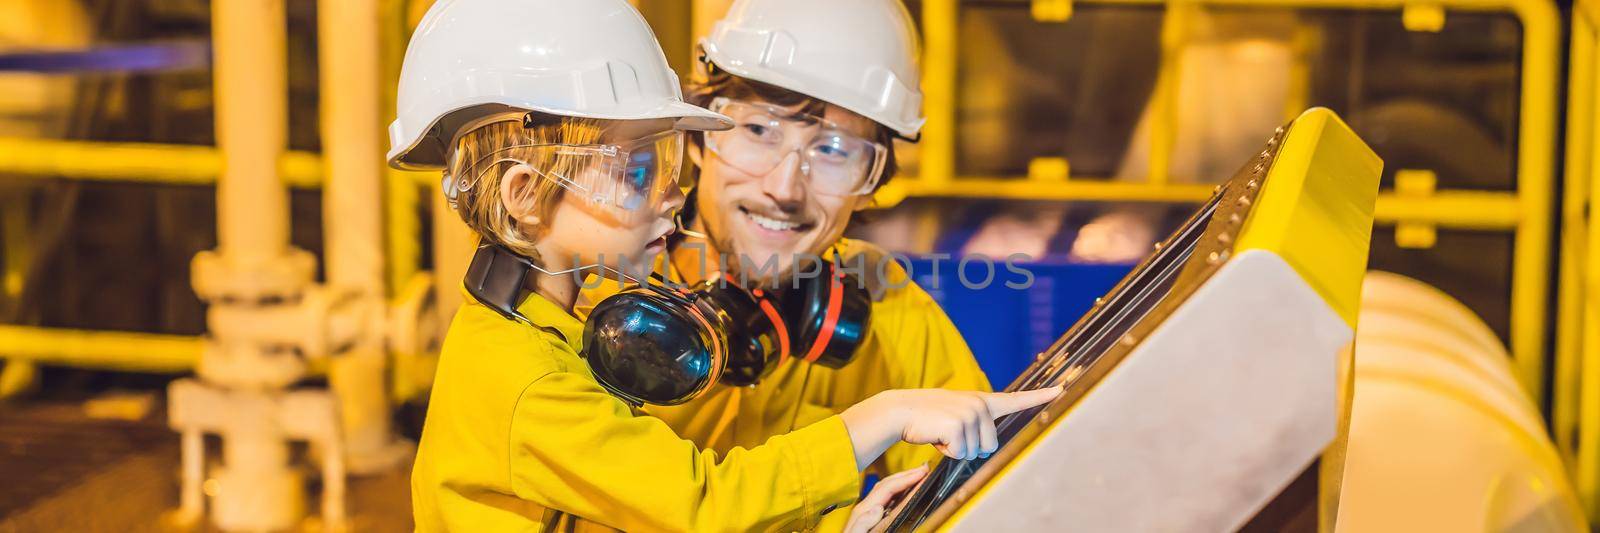 BANNER, LONG FORMAT A young man and a little boy are both in a yellow work uniform, glasses, and helmet in an industrial environment, oil Platform or liquefied gas plant looking at a screen by galitskaya